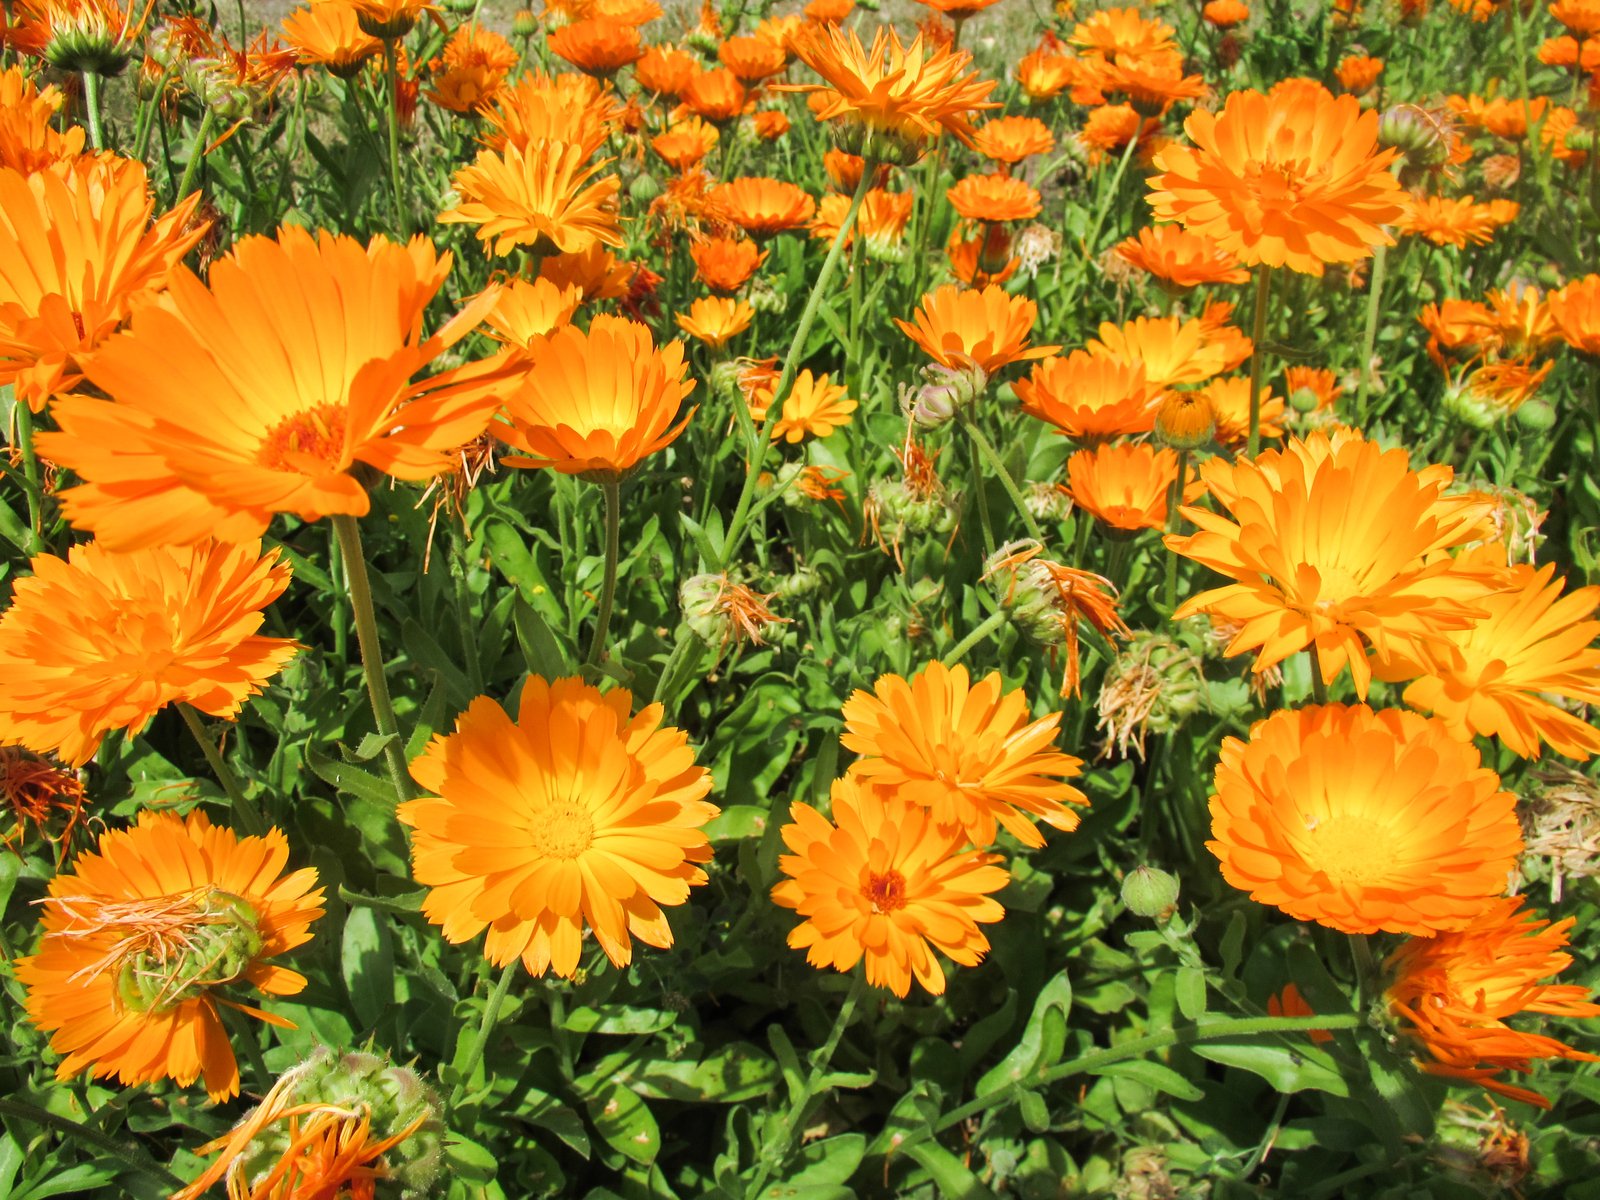 the flowers are orange and the leaves have green